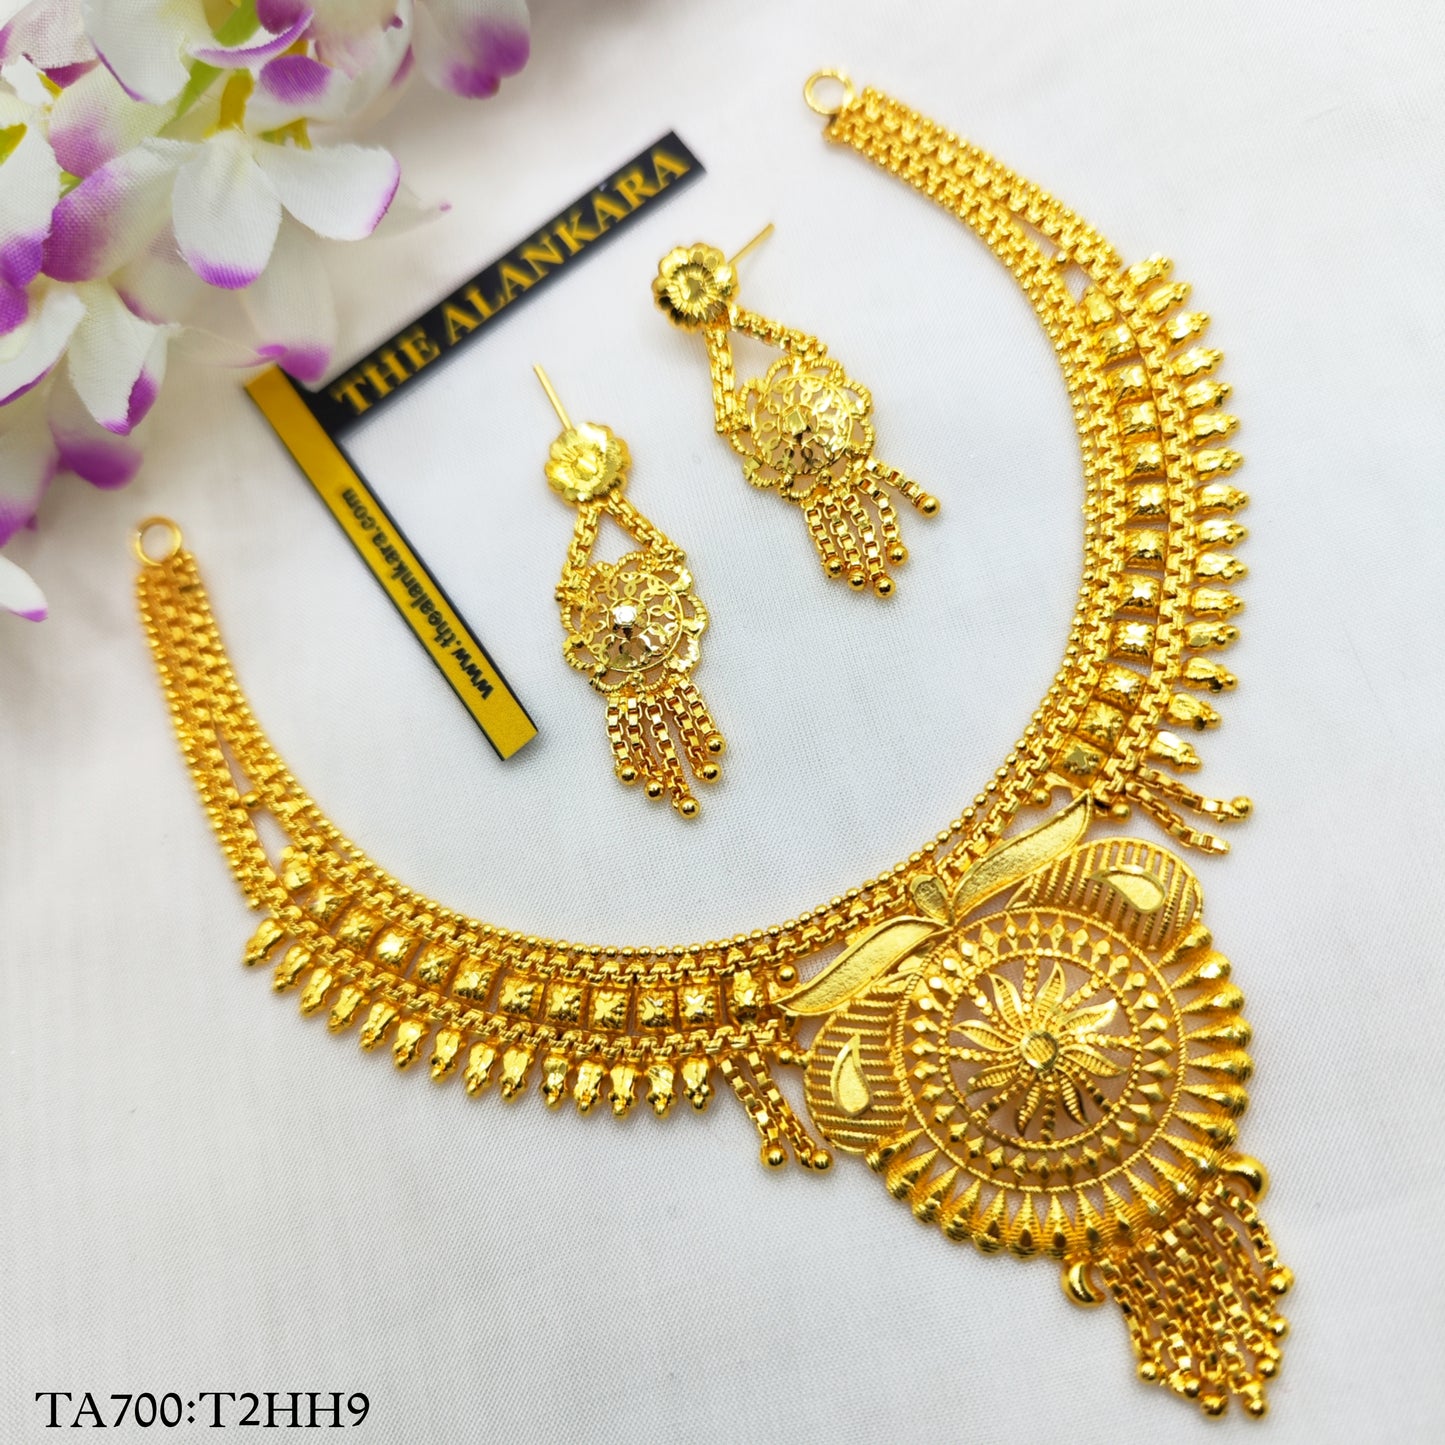 Chakra Design Bengali Bridal Gold Plated Necklace With Earrings